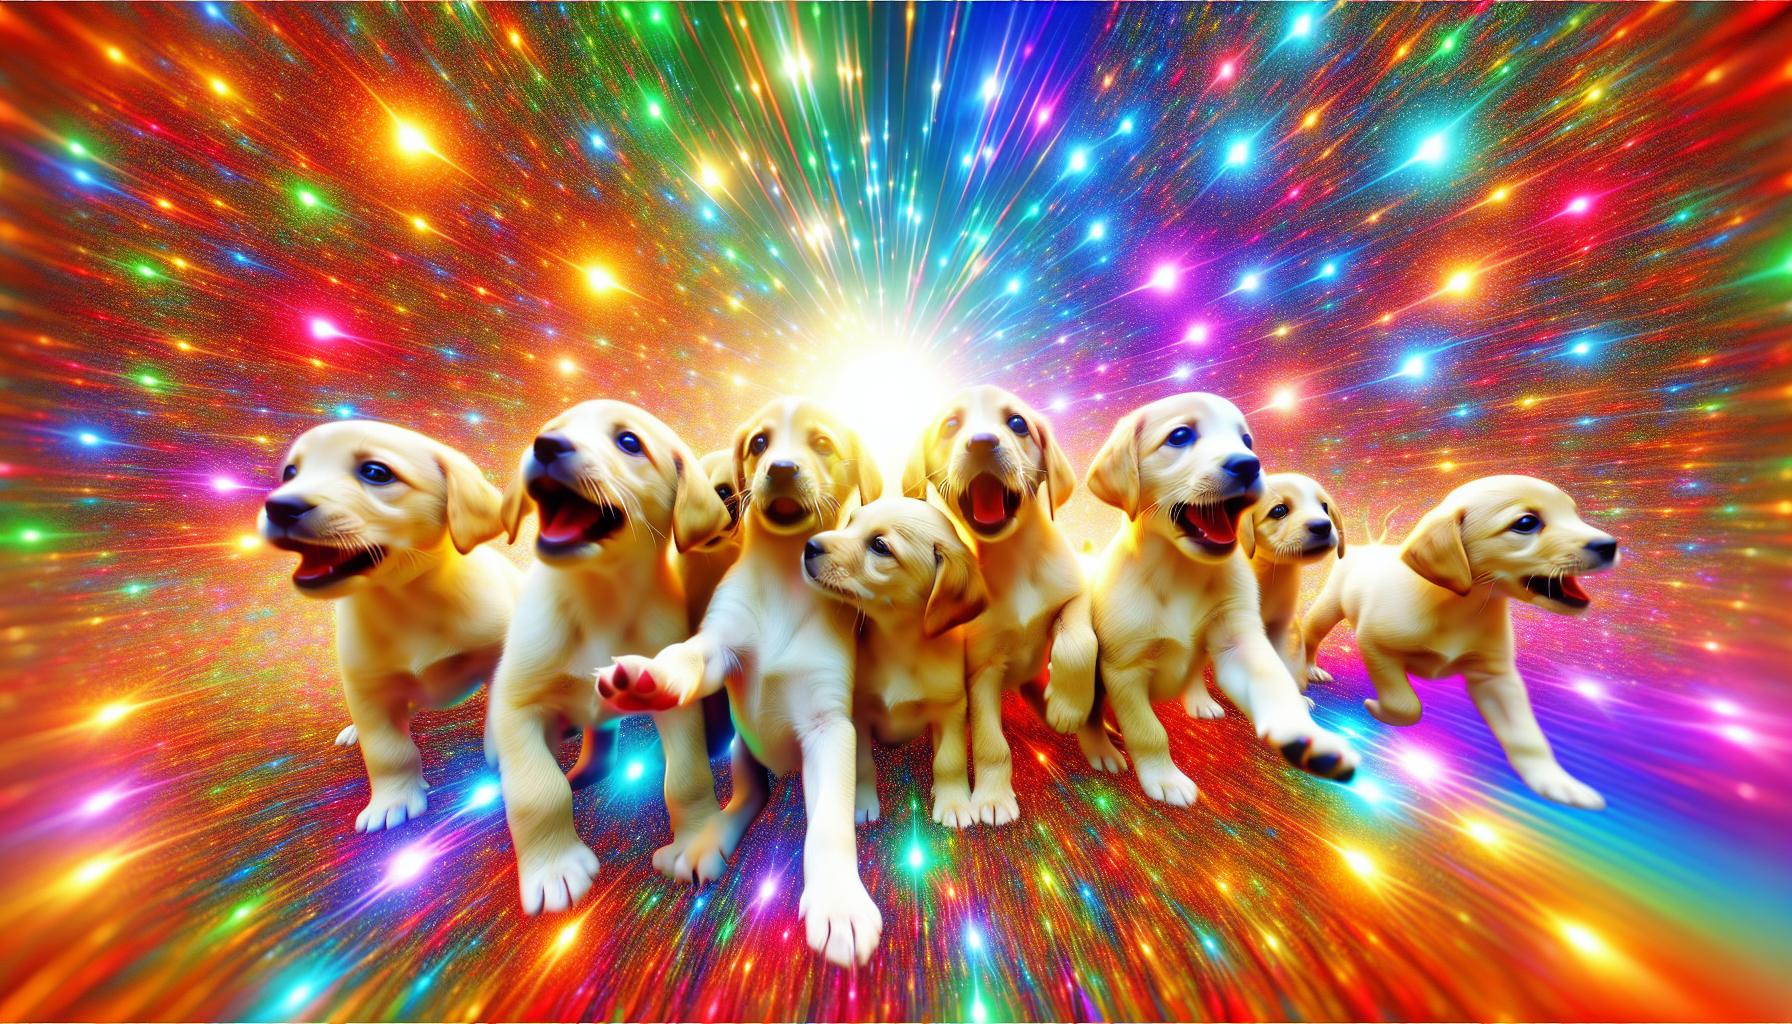 The Unleashed Potential of A.I. in Happy Puppies & Silly Geese | FinOracle